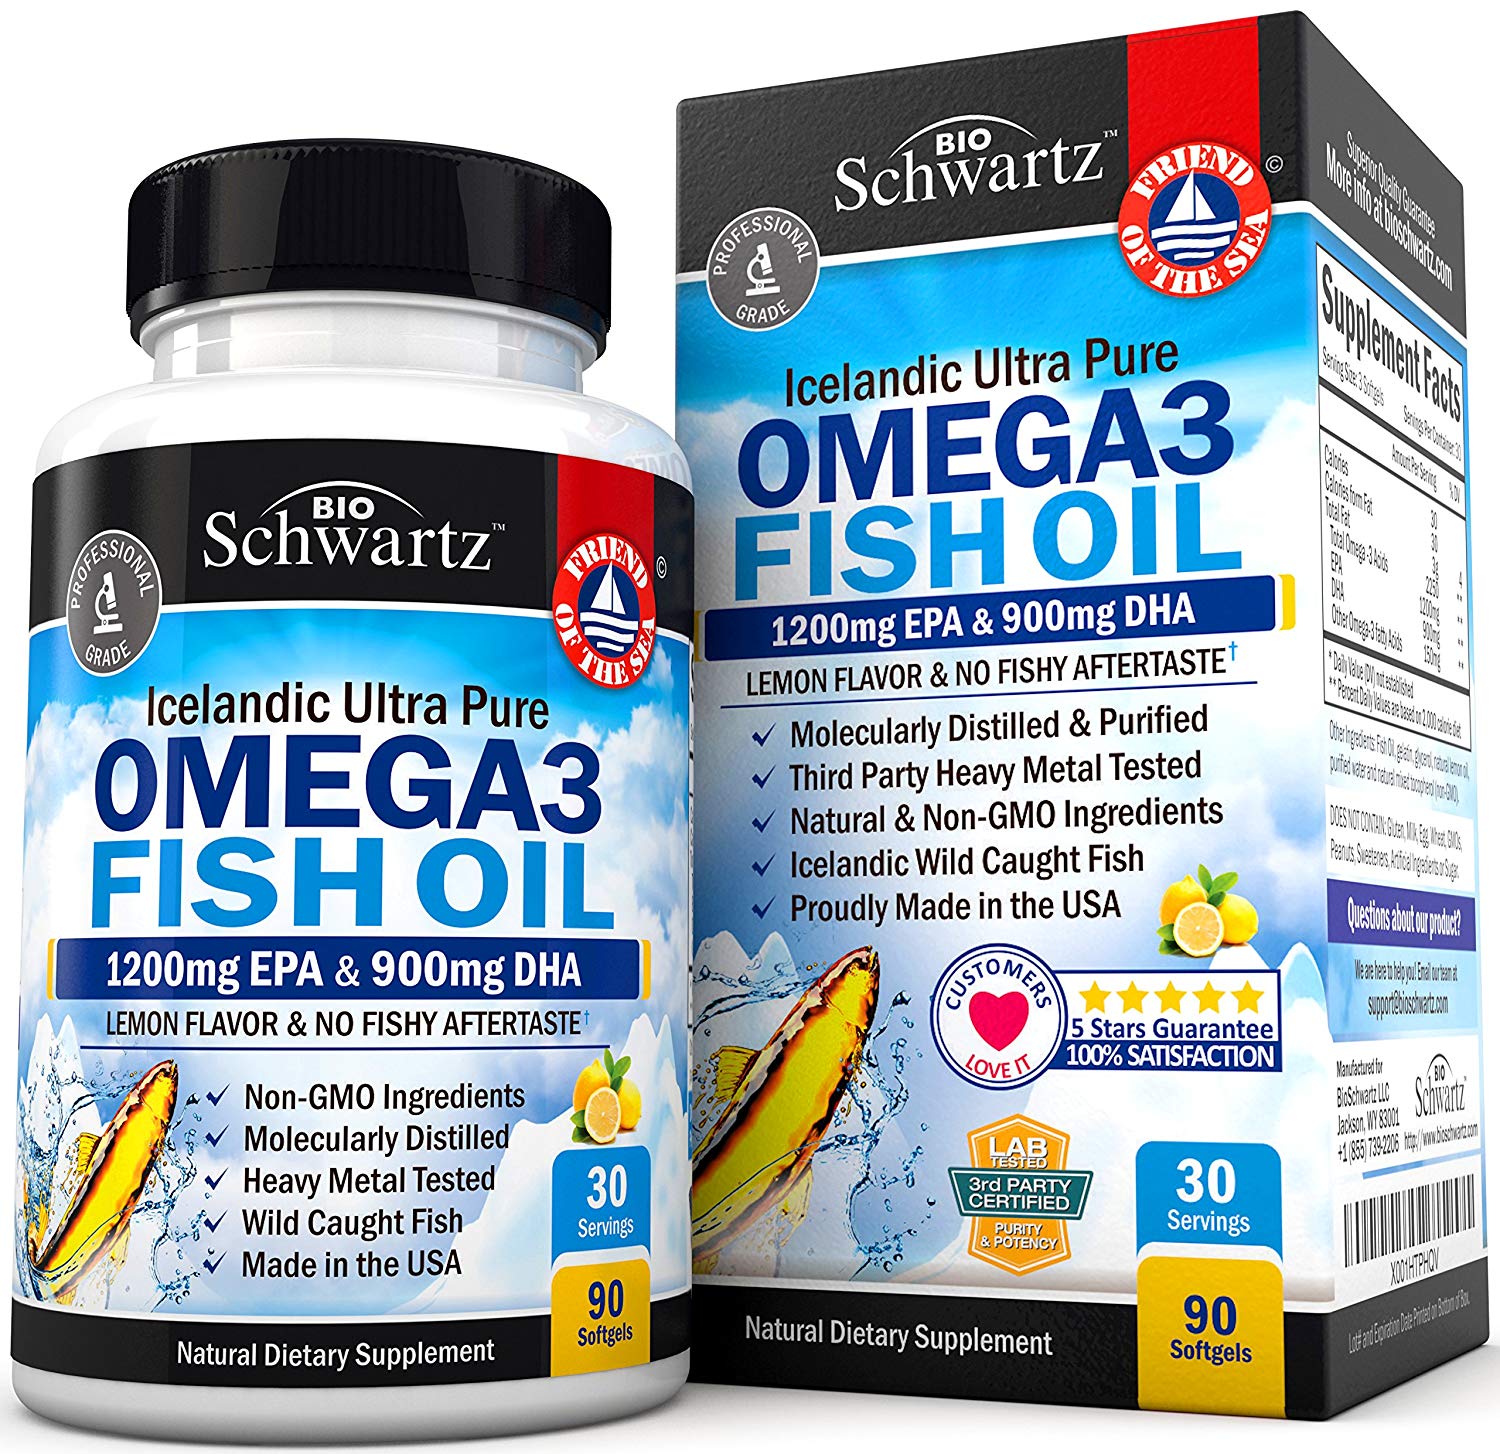 Which brand of fish oil supplement is best